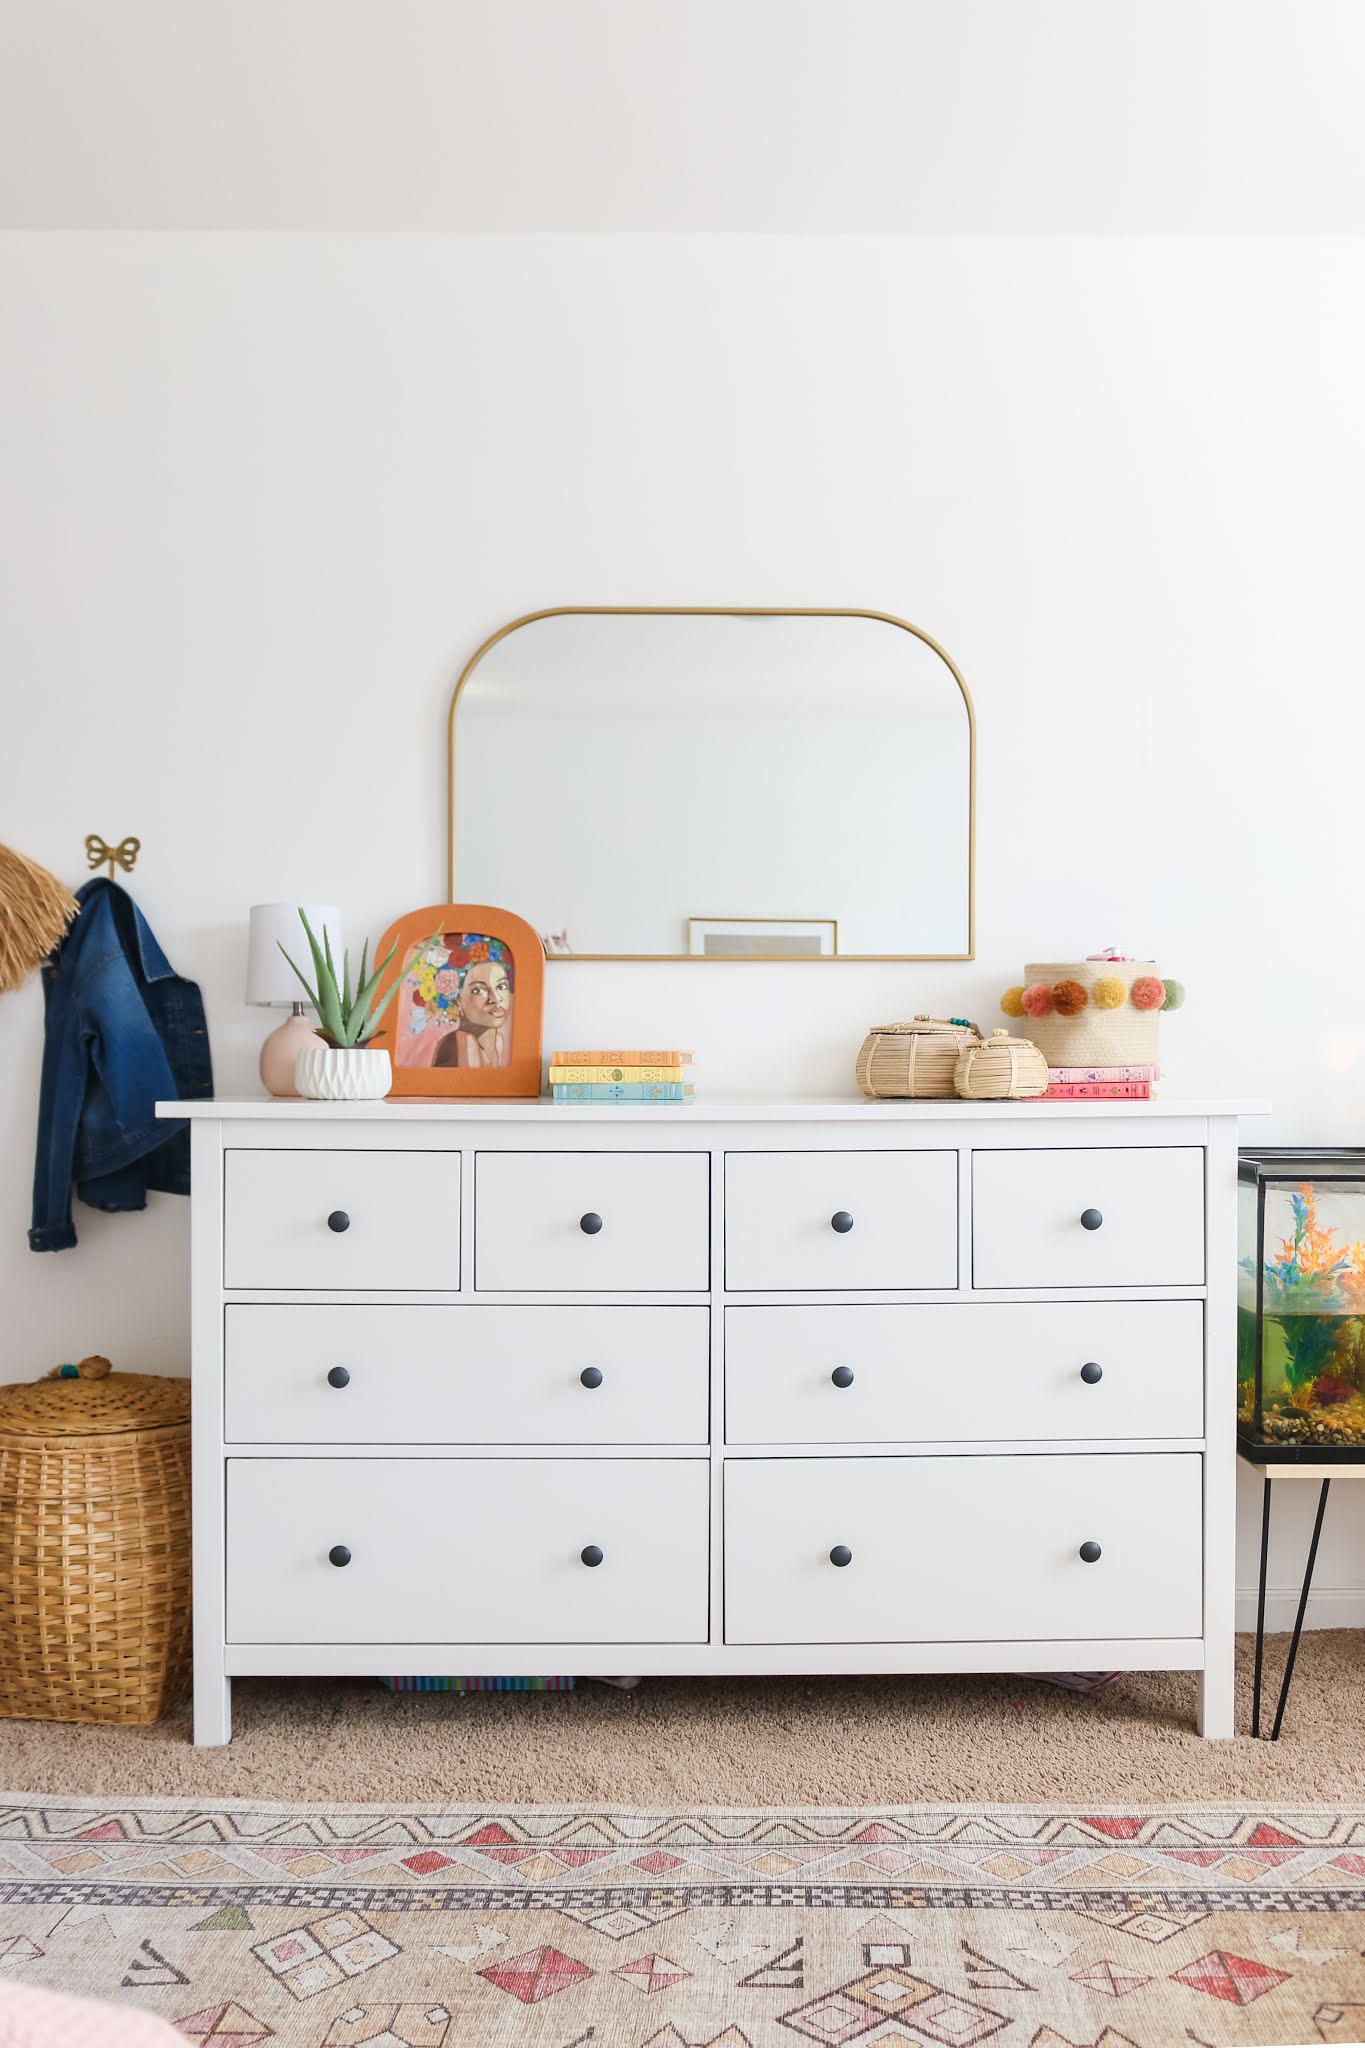 On Simplifying, De-Cluttering, and Refreshing the Girls' Room